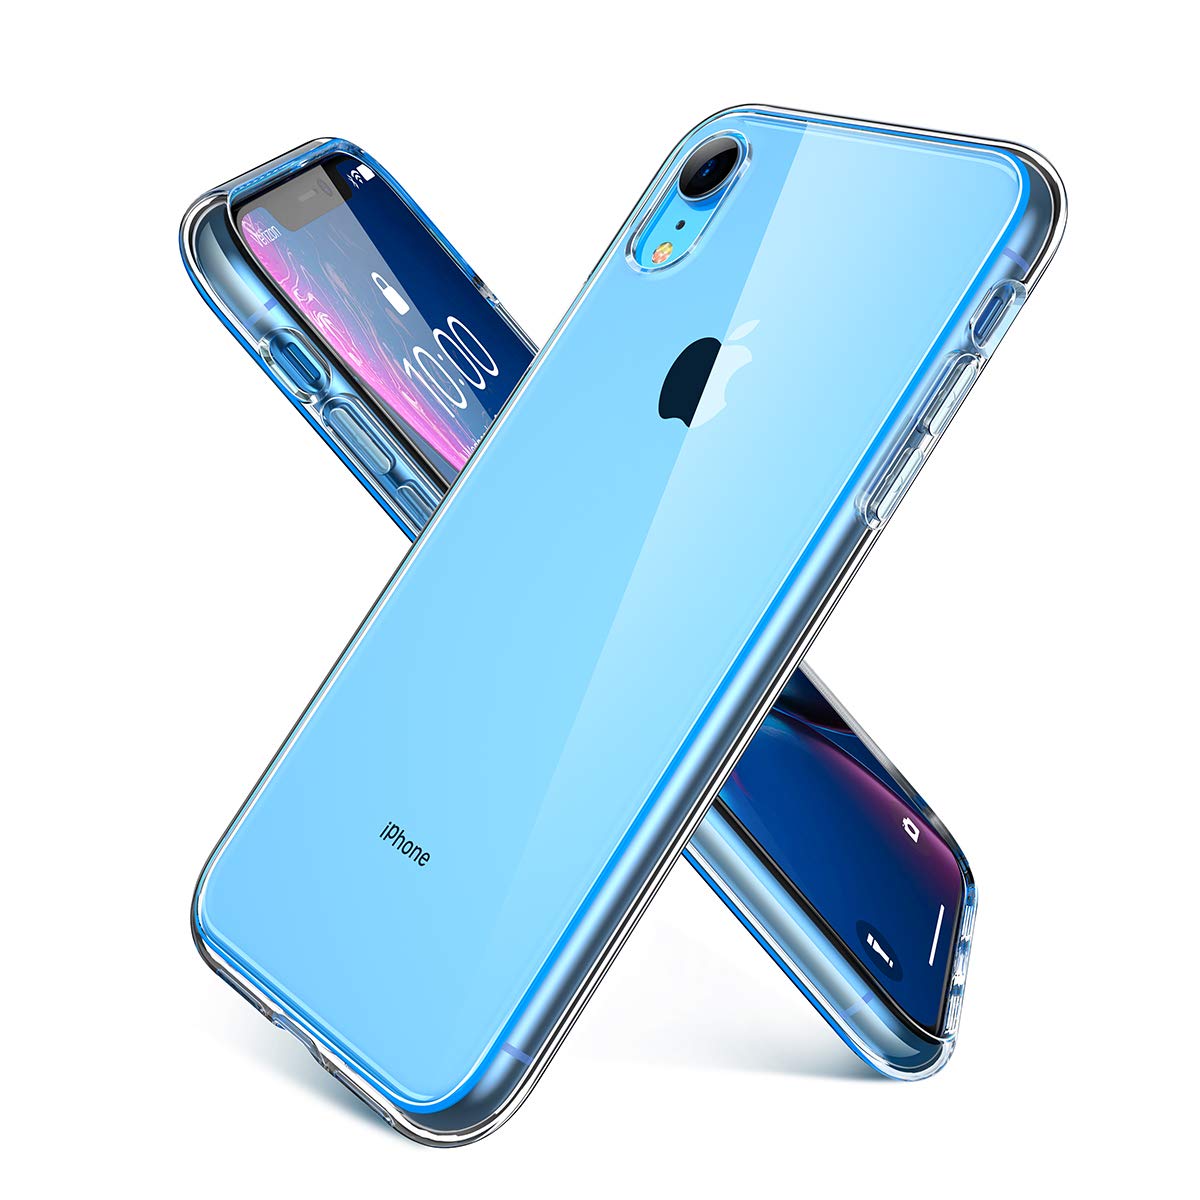 Ainope Cases for IPhone XR, IPhone Xs Max, IPhone X from